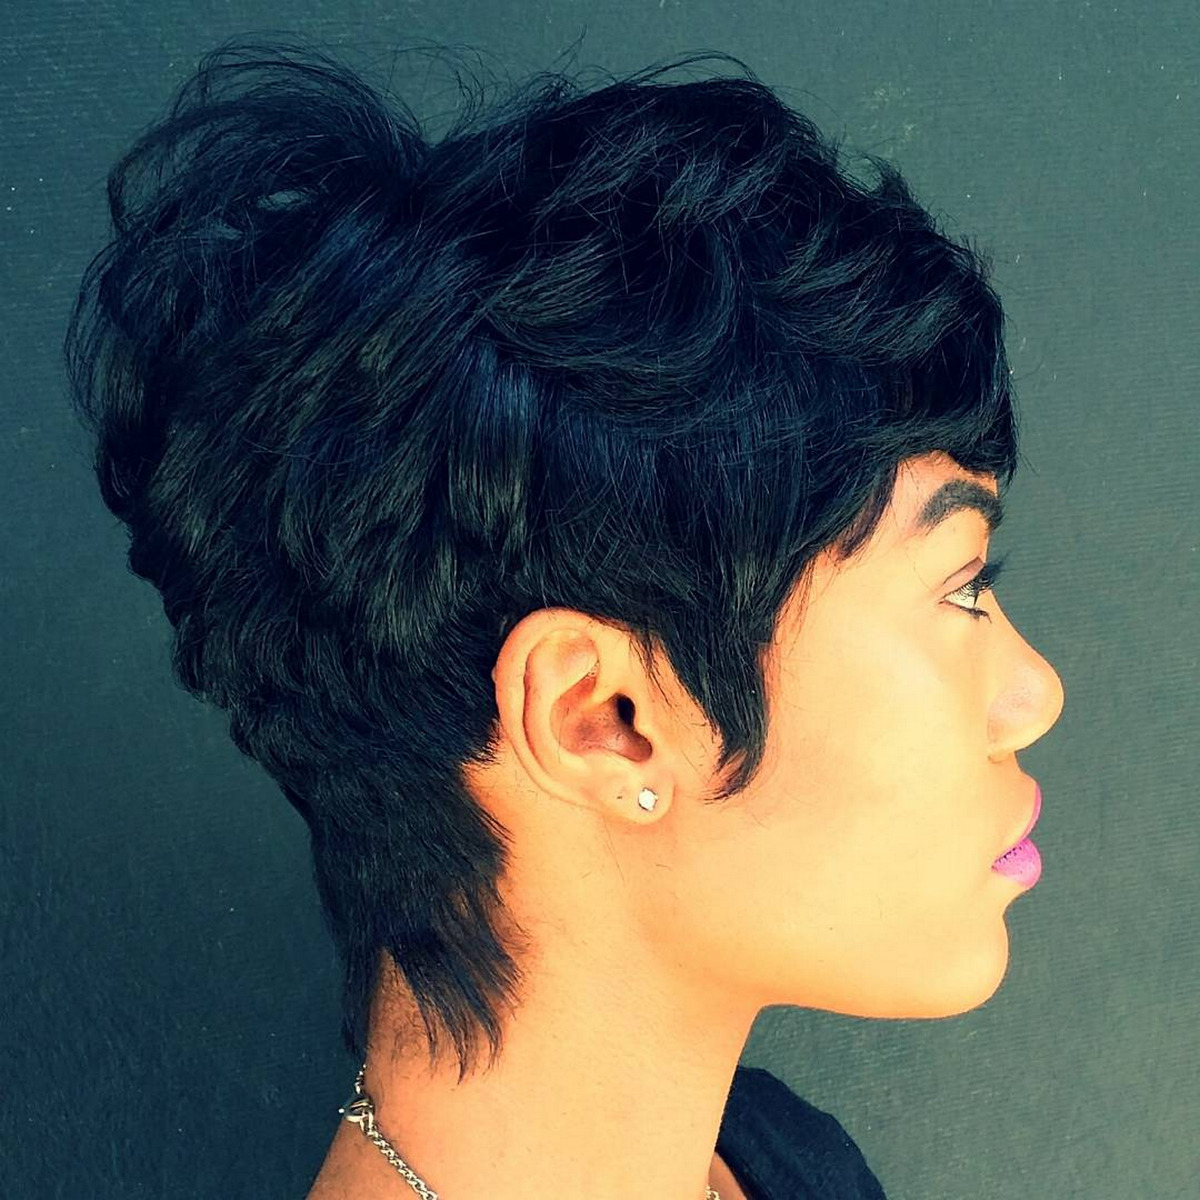 Short Black Hairstyle With Volume On Top